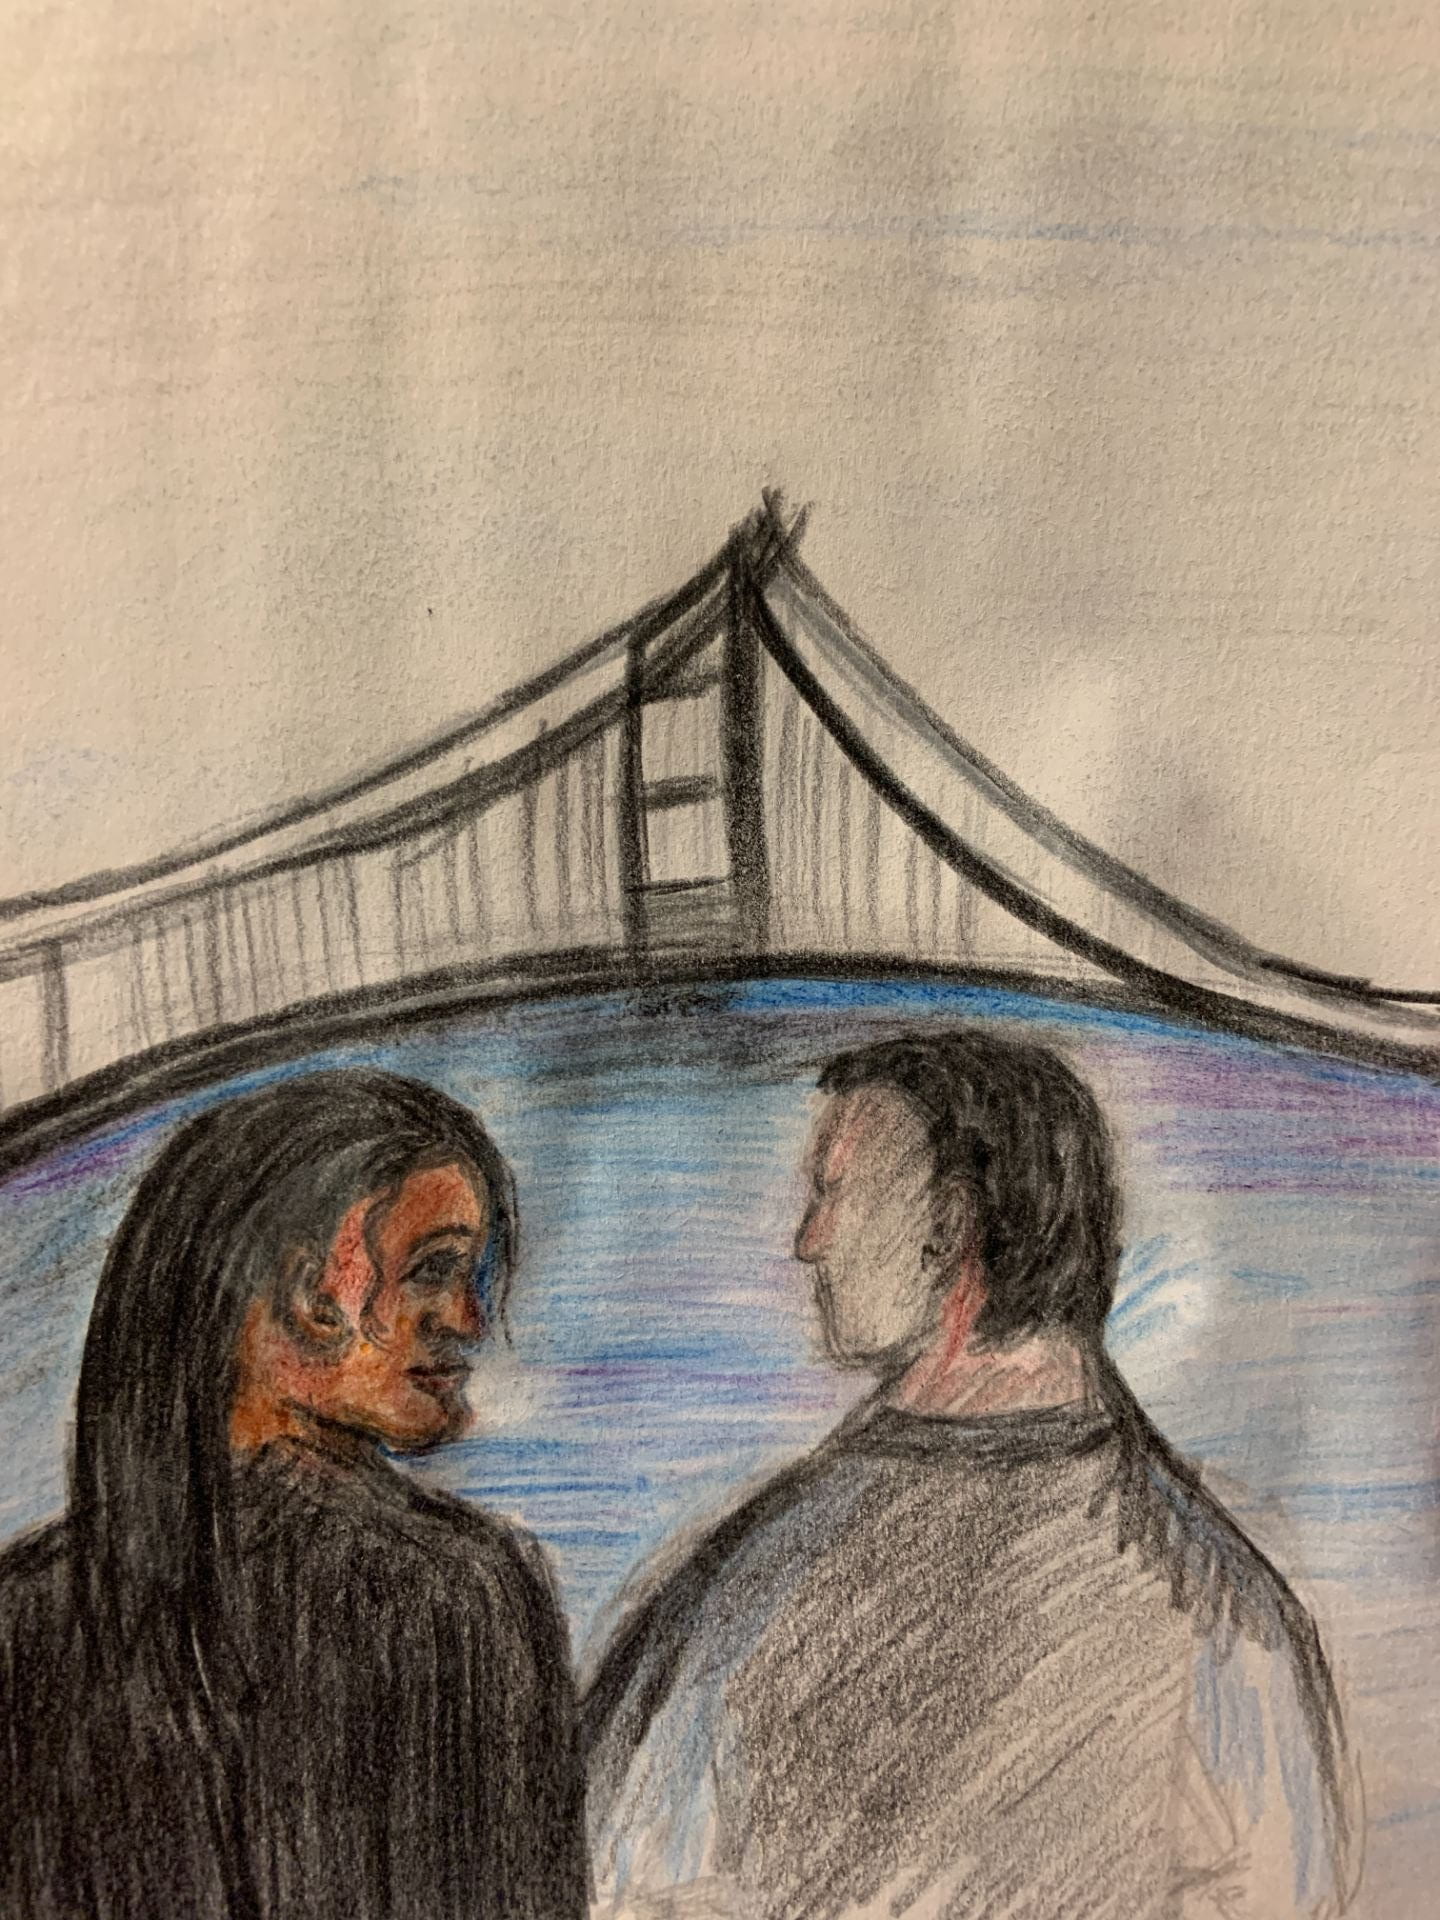 Print and paper. Two figures staring at each other against a backdrop of a bridge